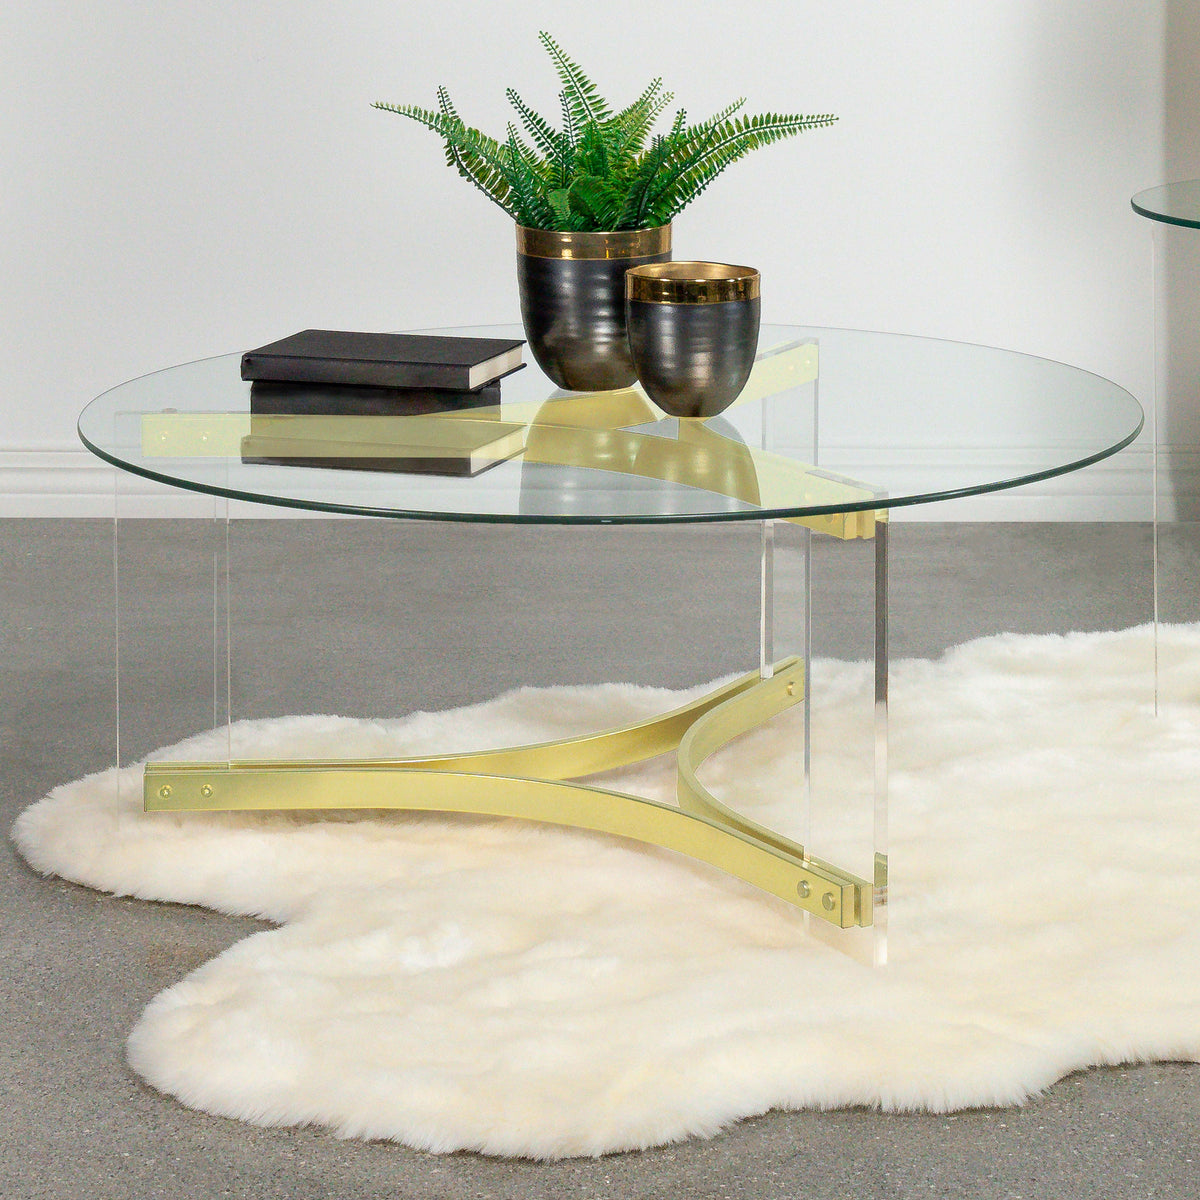 Janessa Round Glass Top Coffee Table With Acrylic Legs Clear and Matte Brass Janessa Round Glass Top Coffee Table With Acrylic Legs Clear and Matte Brass Half Price Furniture